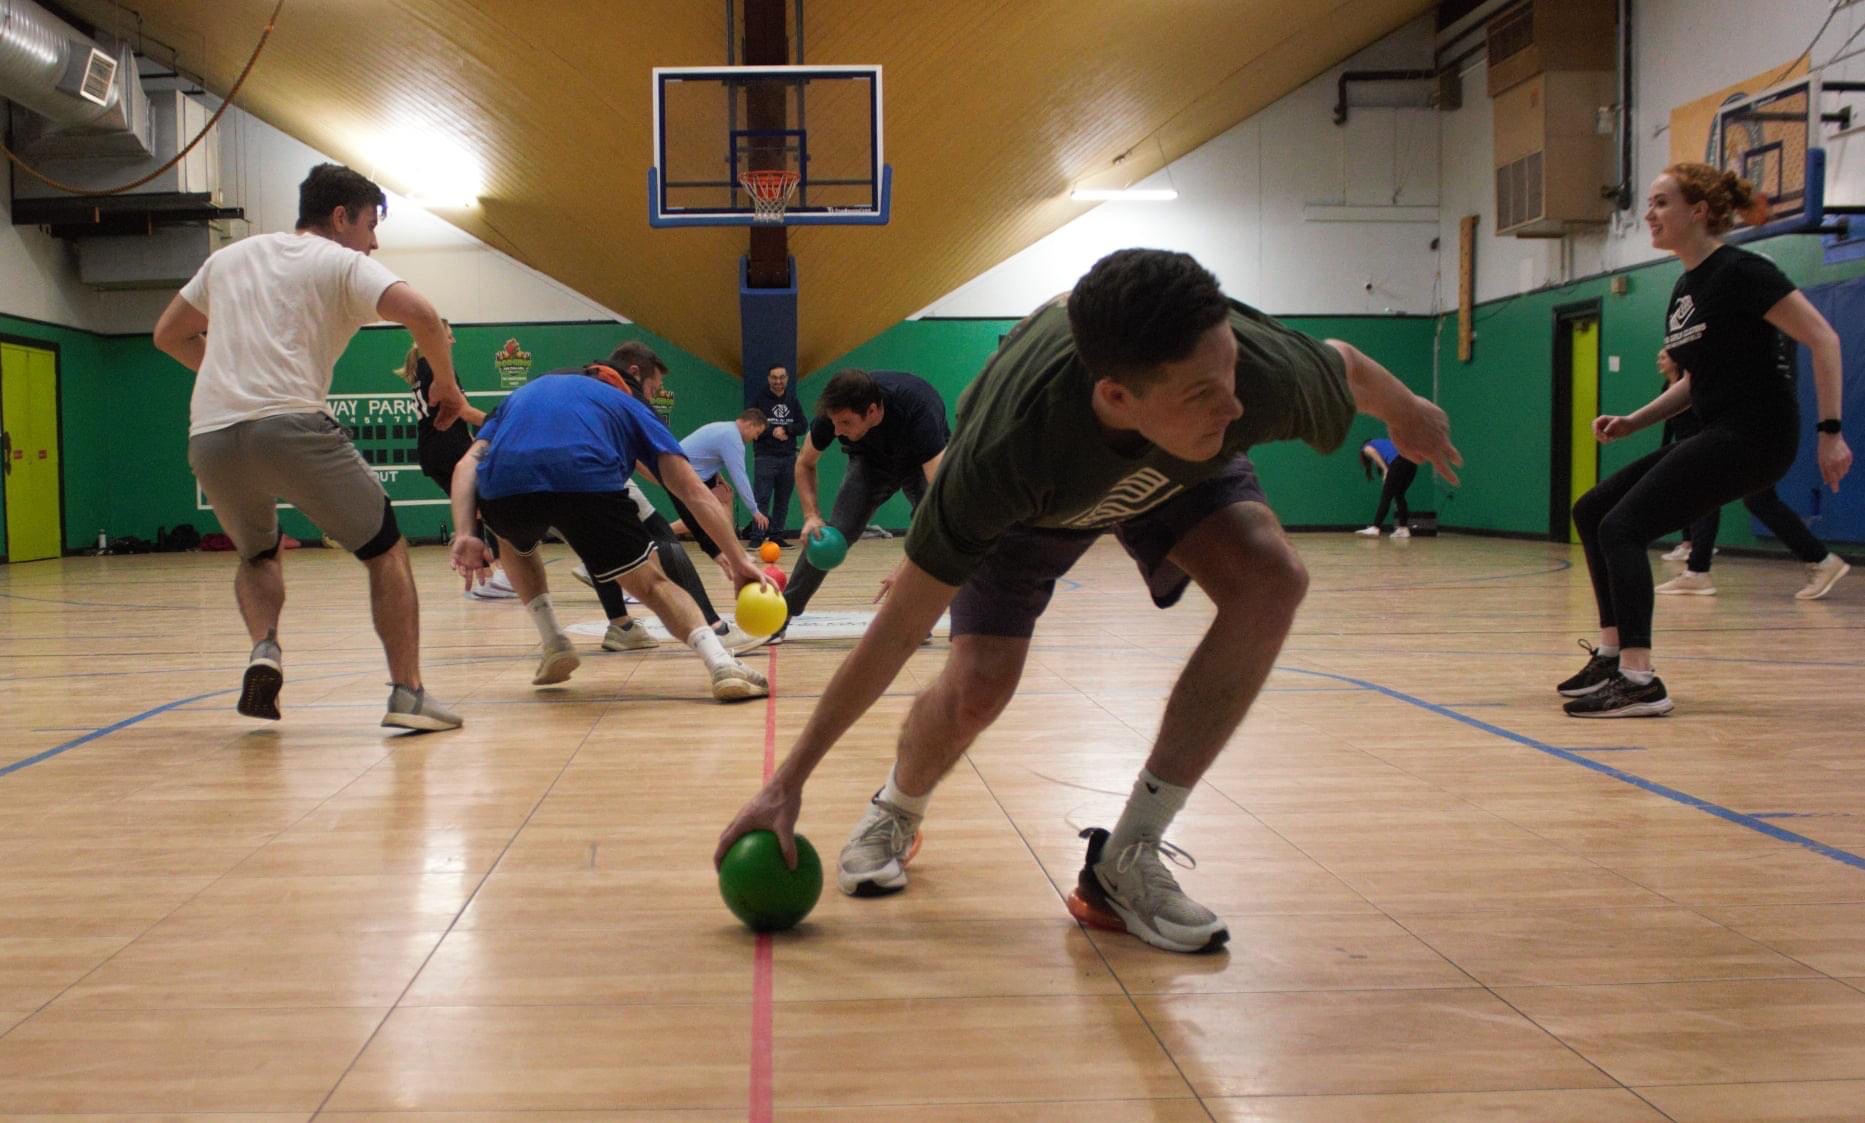 Leaders in the Law Face-Off in One of the Fiercest Dodgeball Match-Ups at Dodging Through the Decades